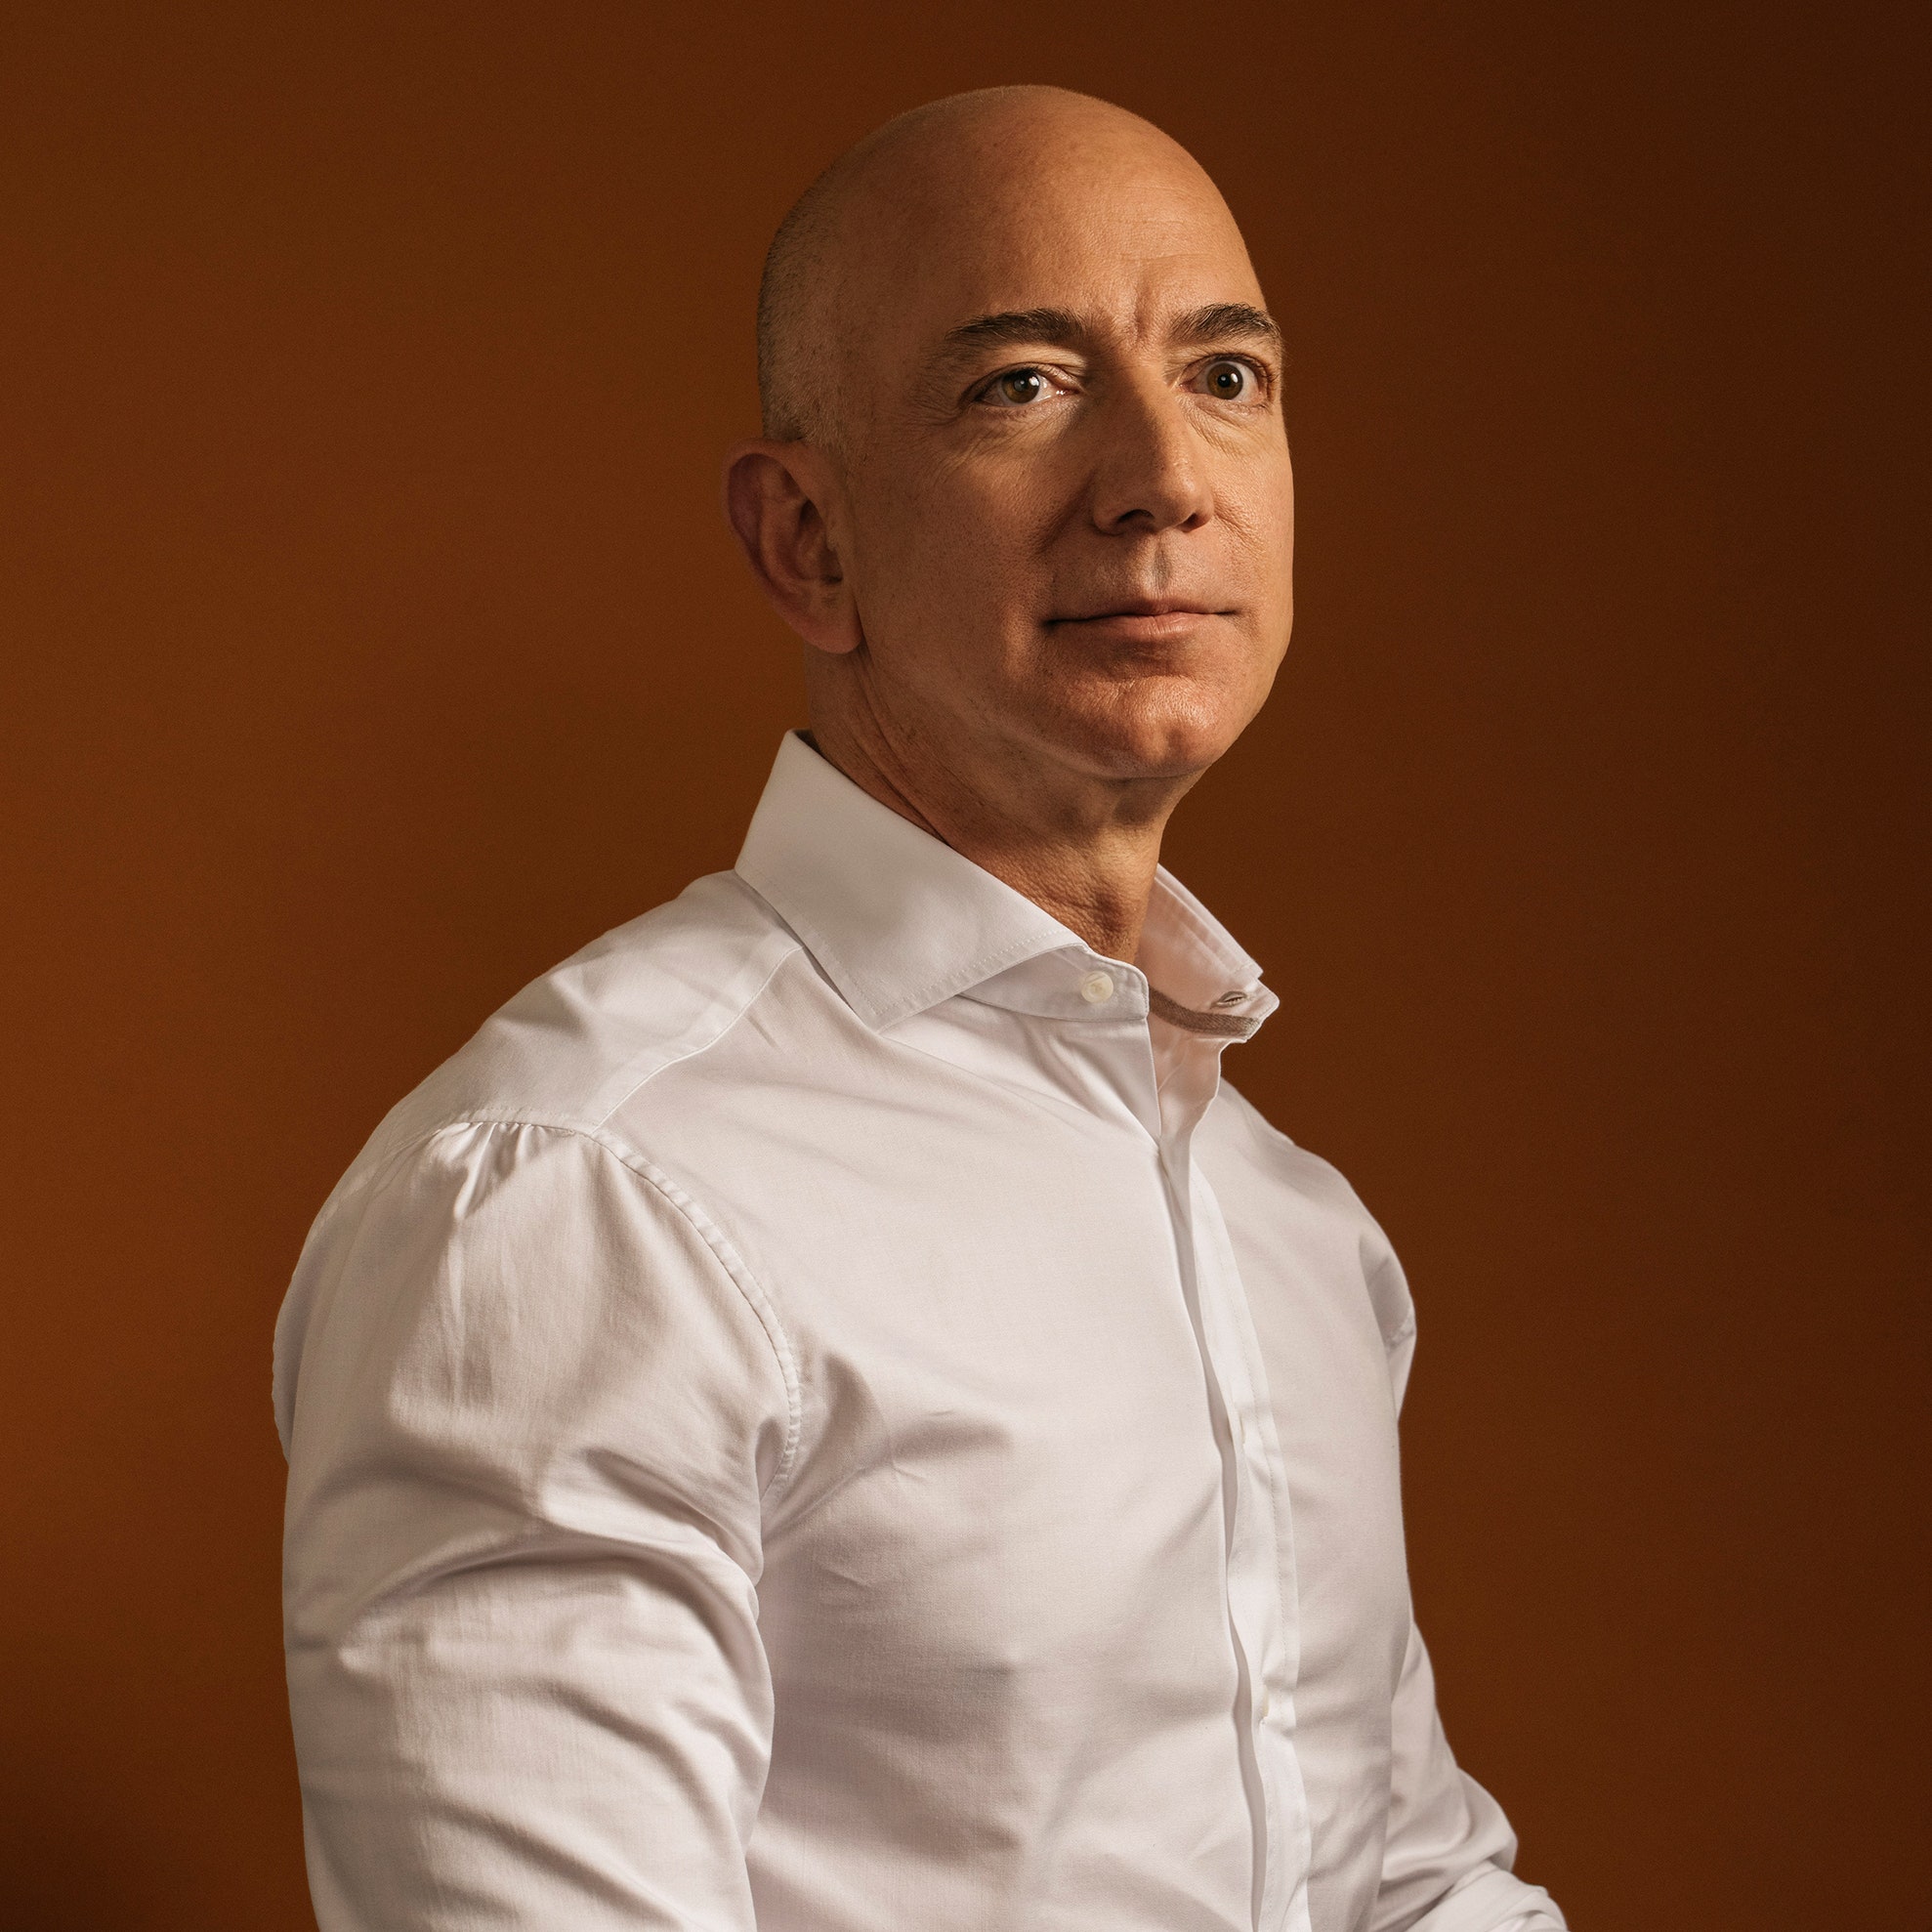 How Jeff Bezos Sees the Press: An Interview with the Journalist Brad Stone. The New Yorker